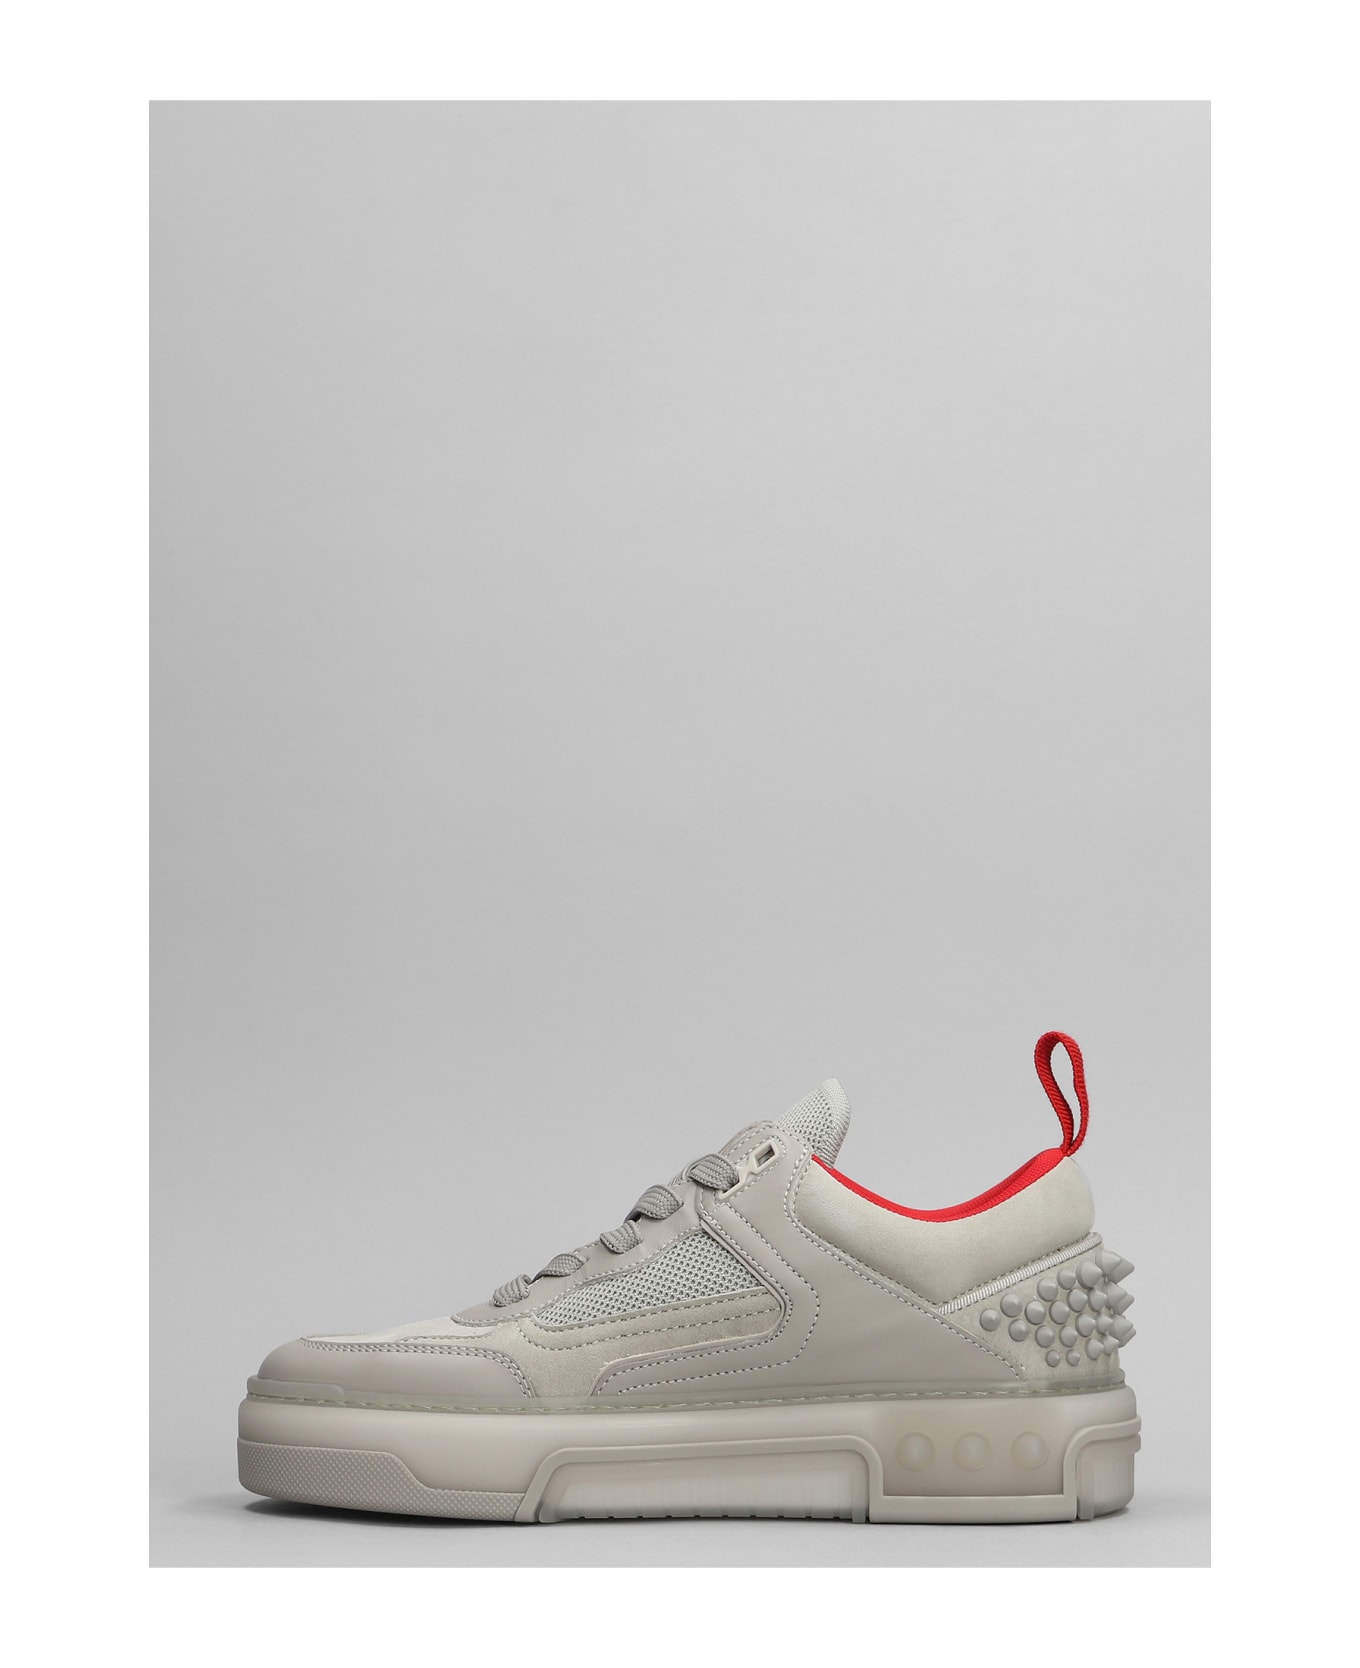 Christian Louboutin Astroloubi Sneakers In Grey Suede And Leather - grey スニーカー